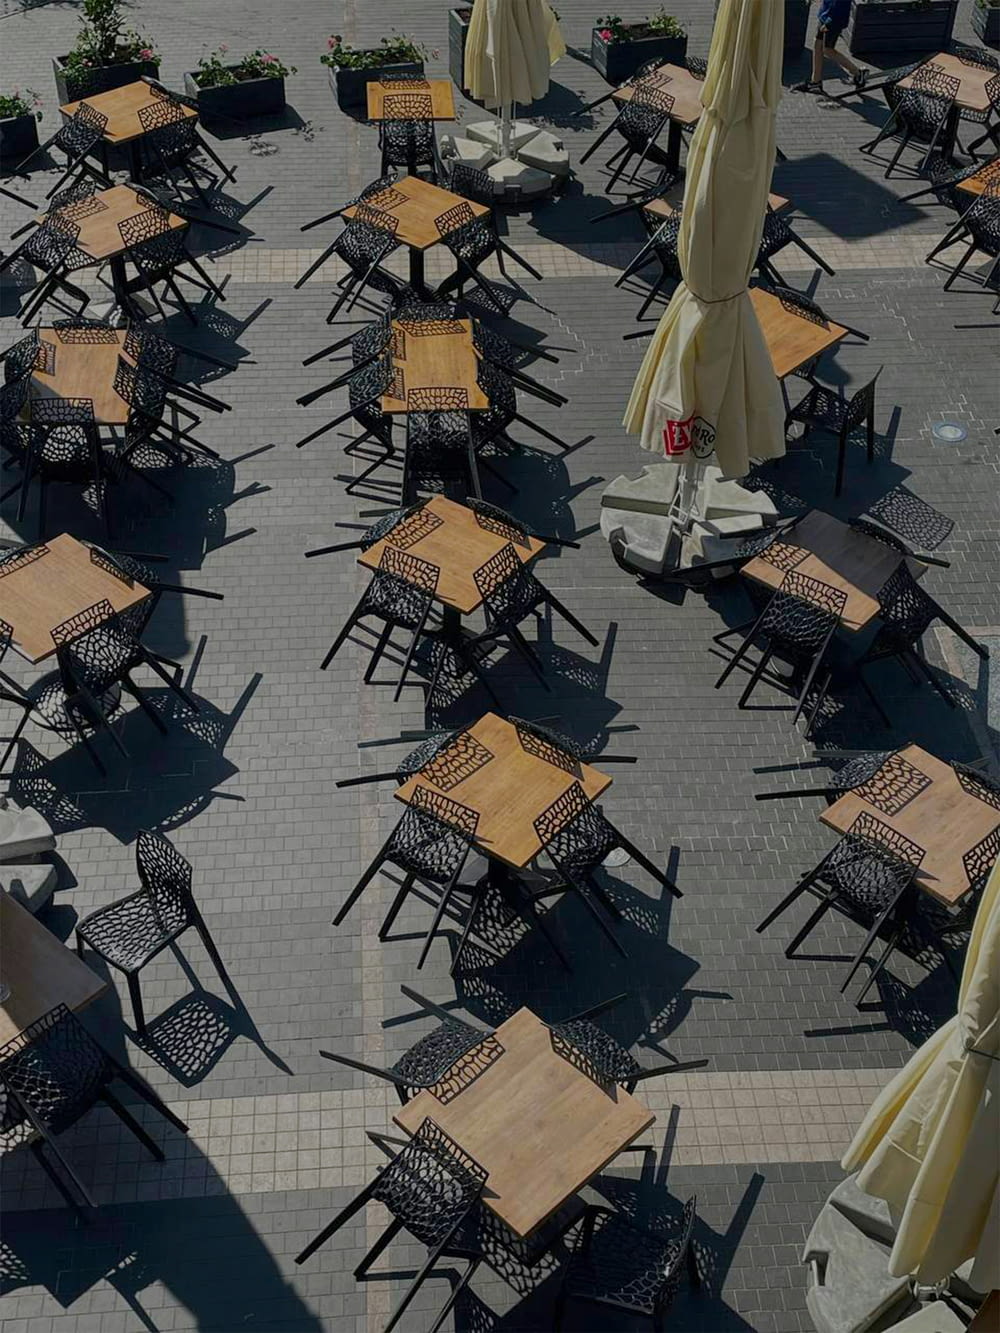 a bunch of tables and chairs with umbrellas